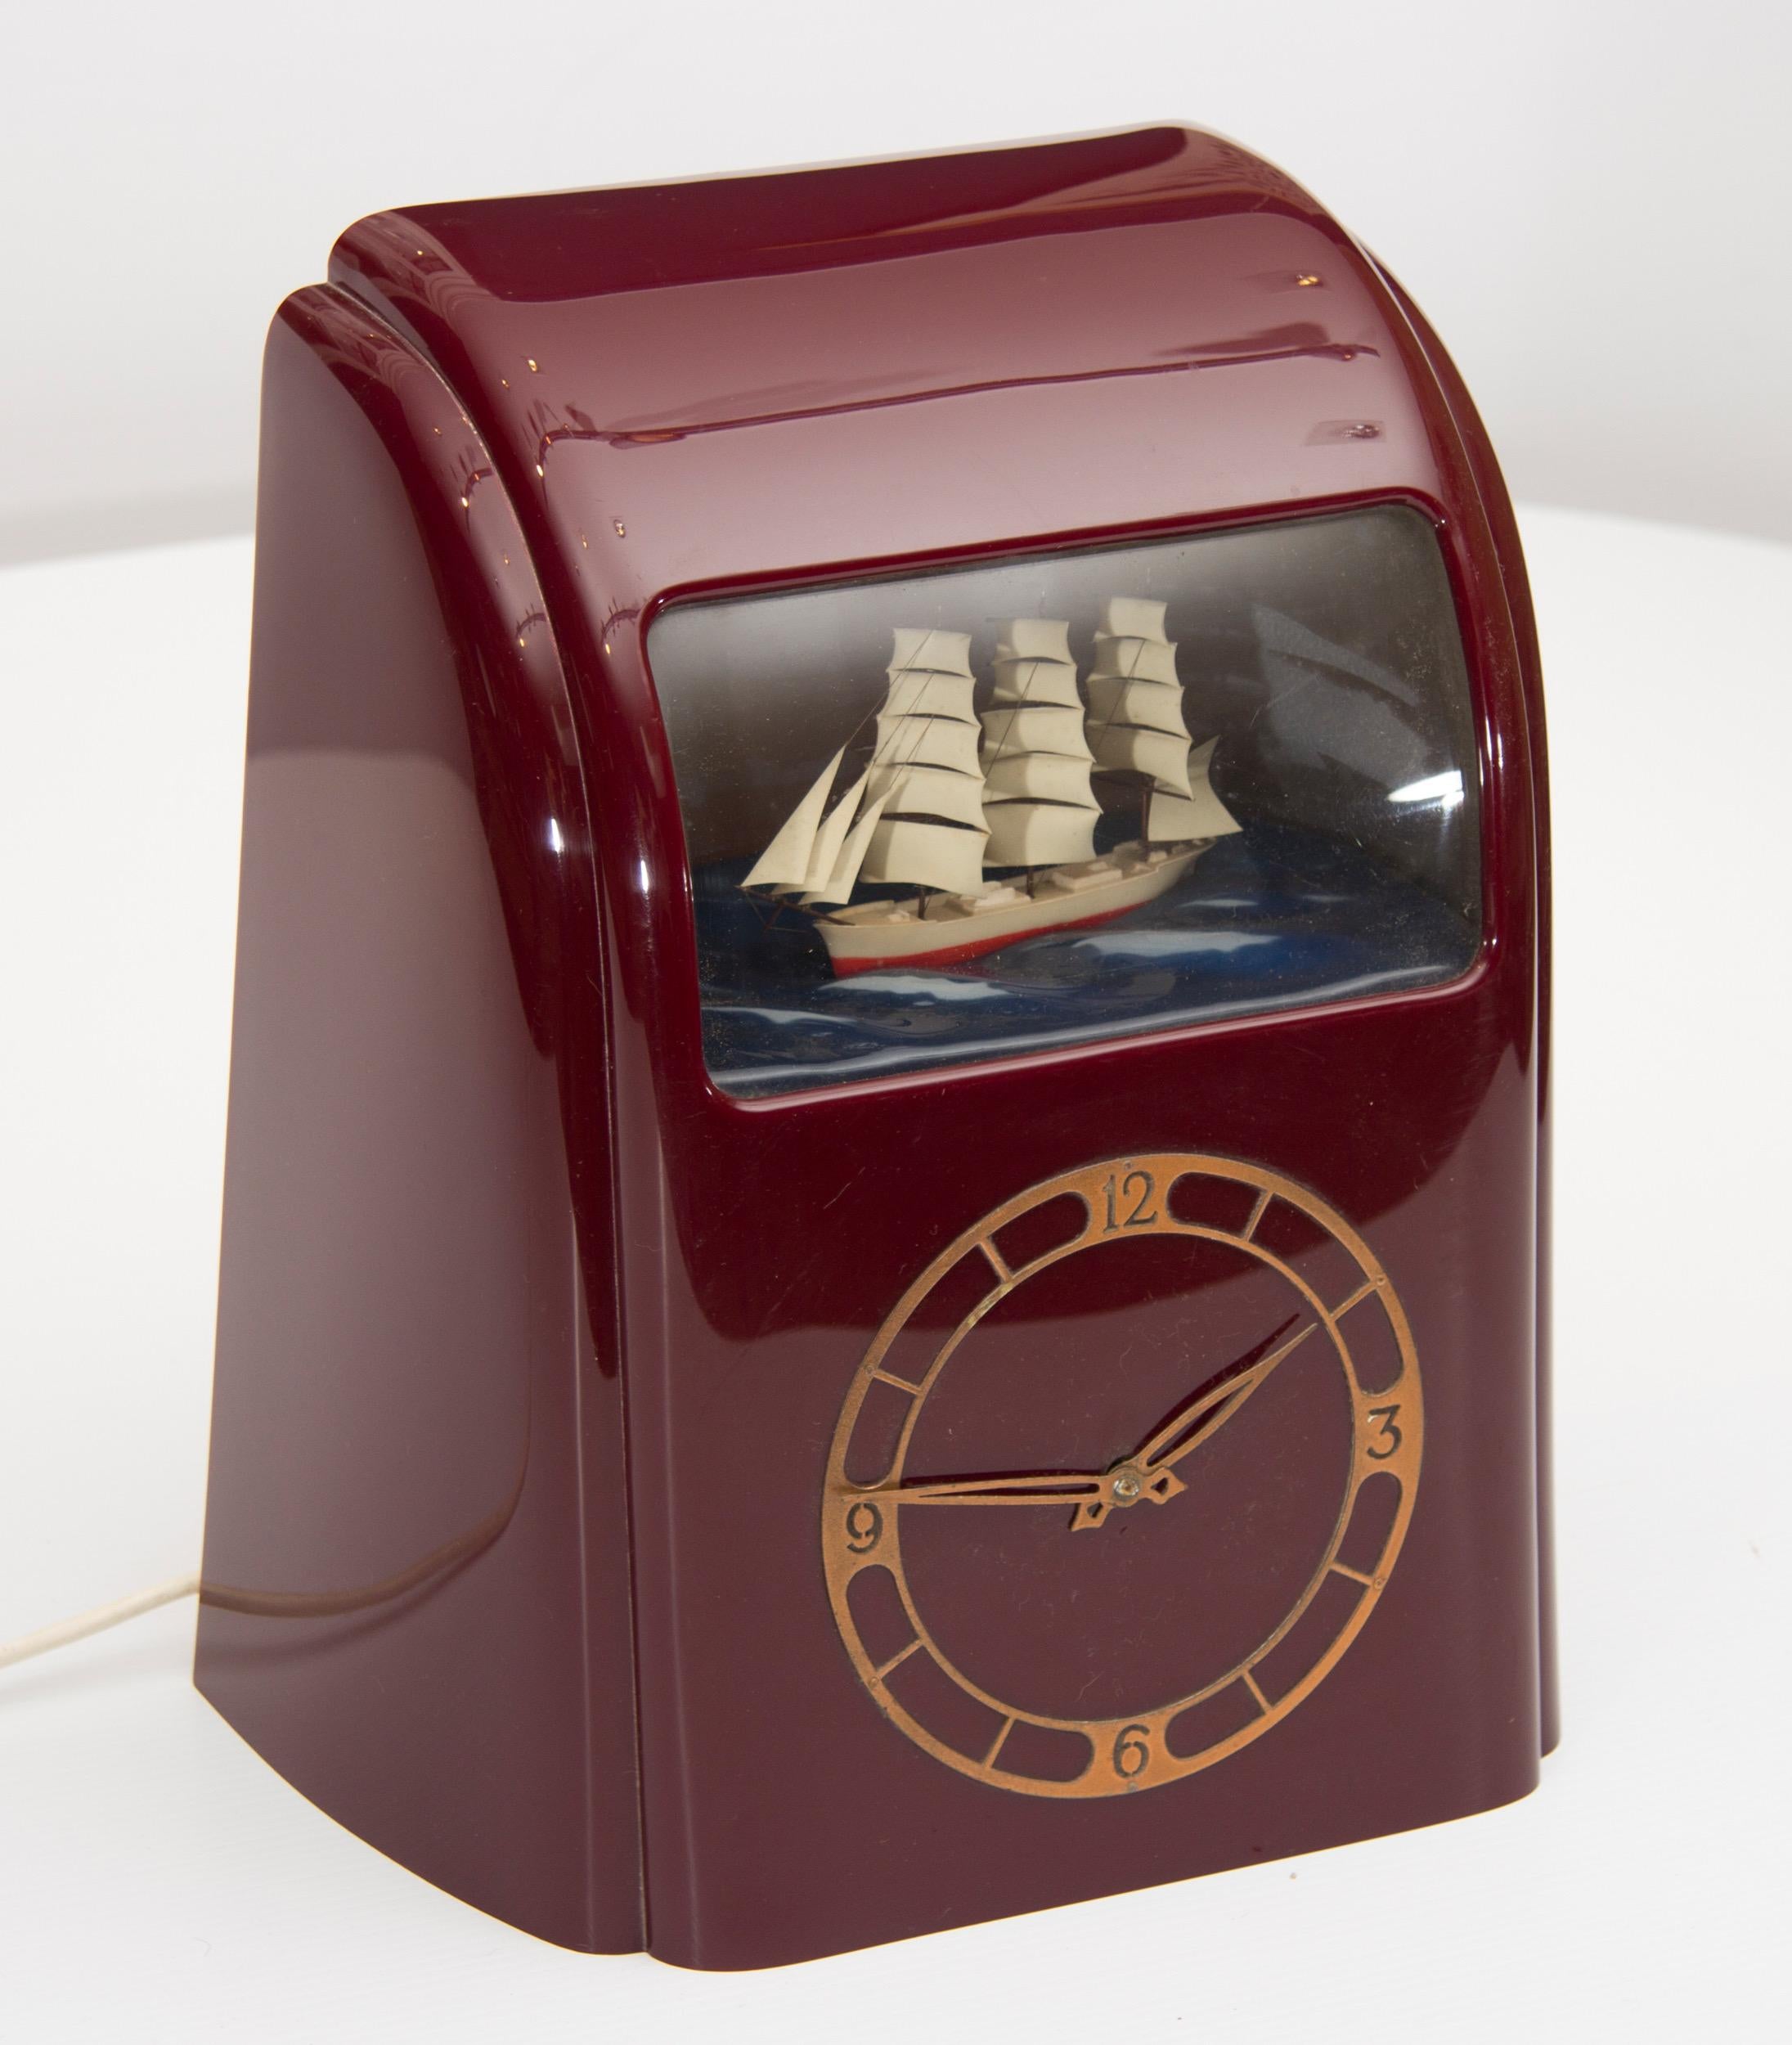 Art Deco vitascope clock in a very rare burgundy bakelite case.
Burgundy bakelite clock, the clipper boat rocks gently on the Sea while the background Illumination changes from Sunrise to Sunset, electrically operated so it keeps perfect time, with